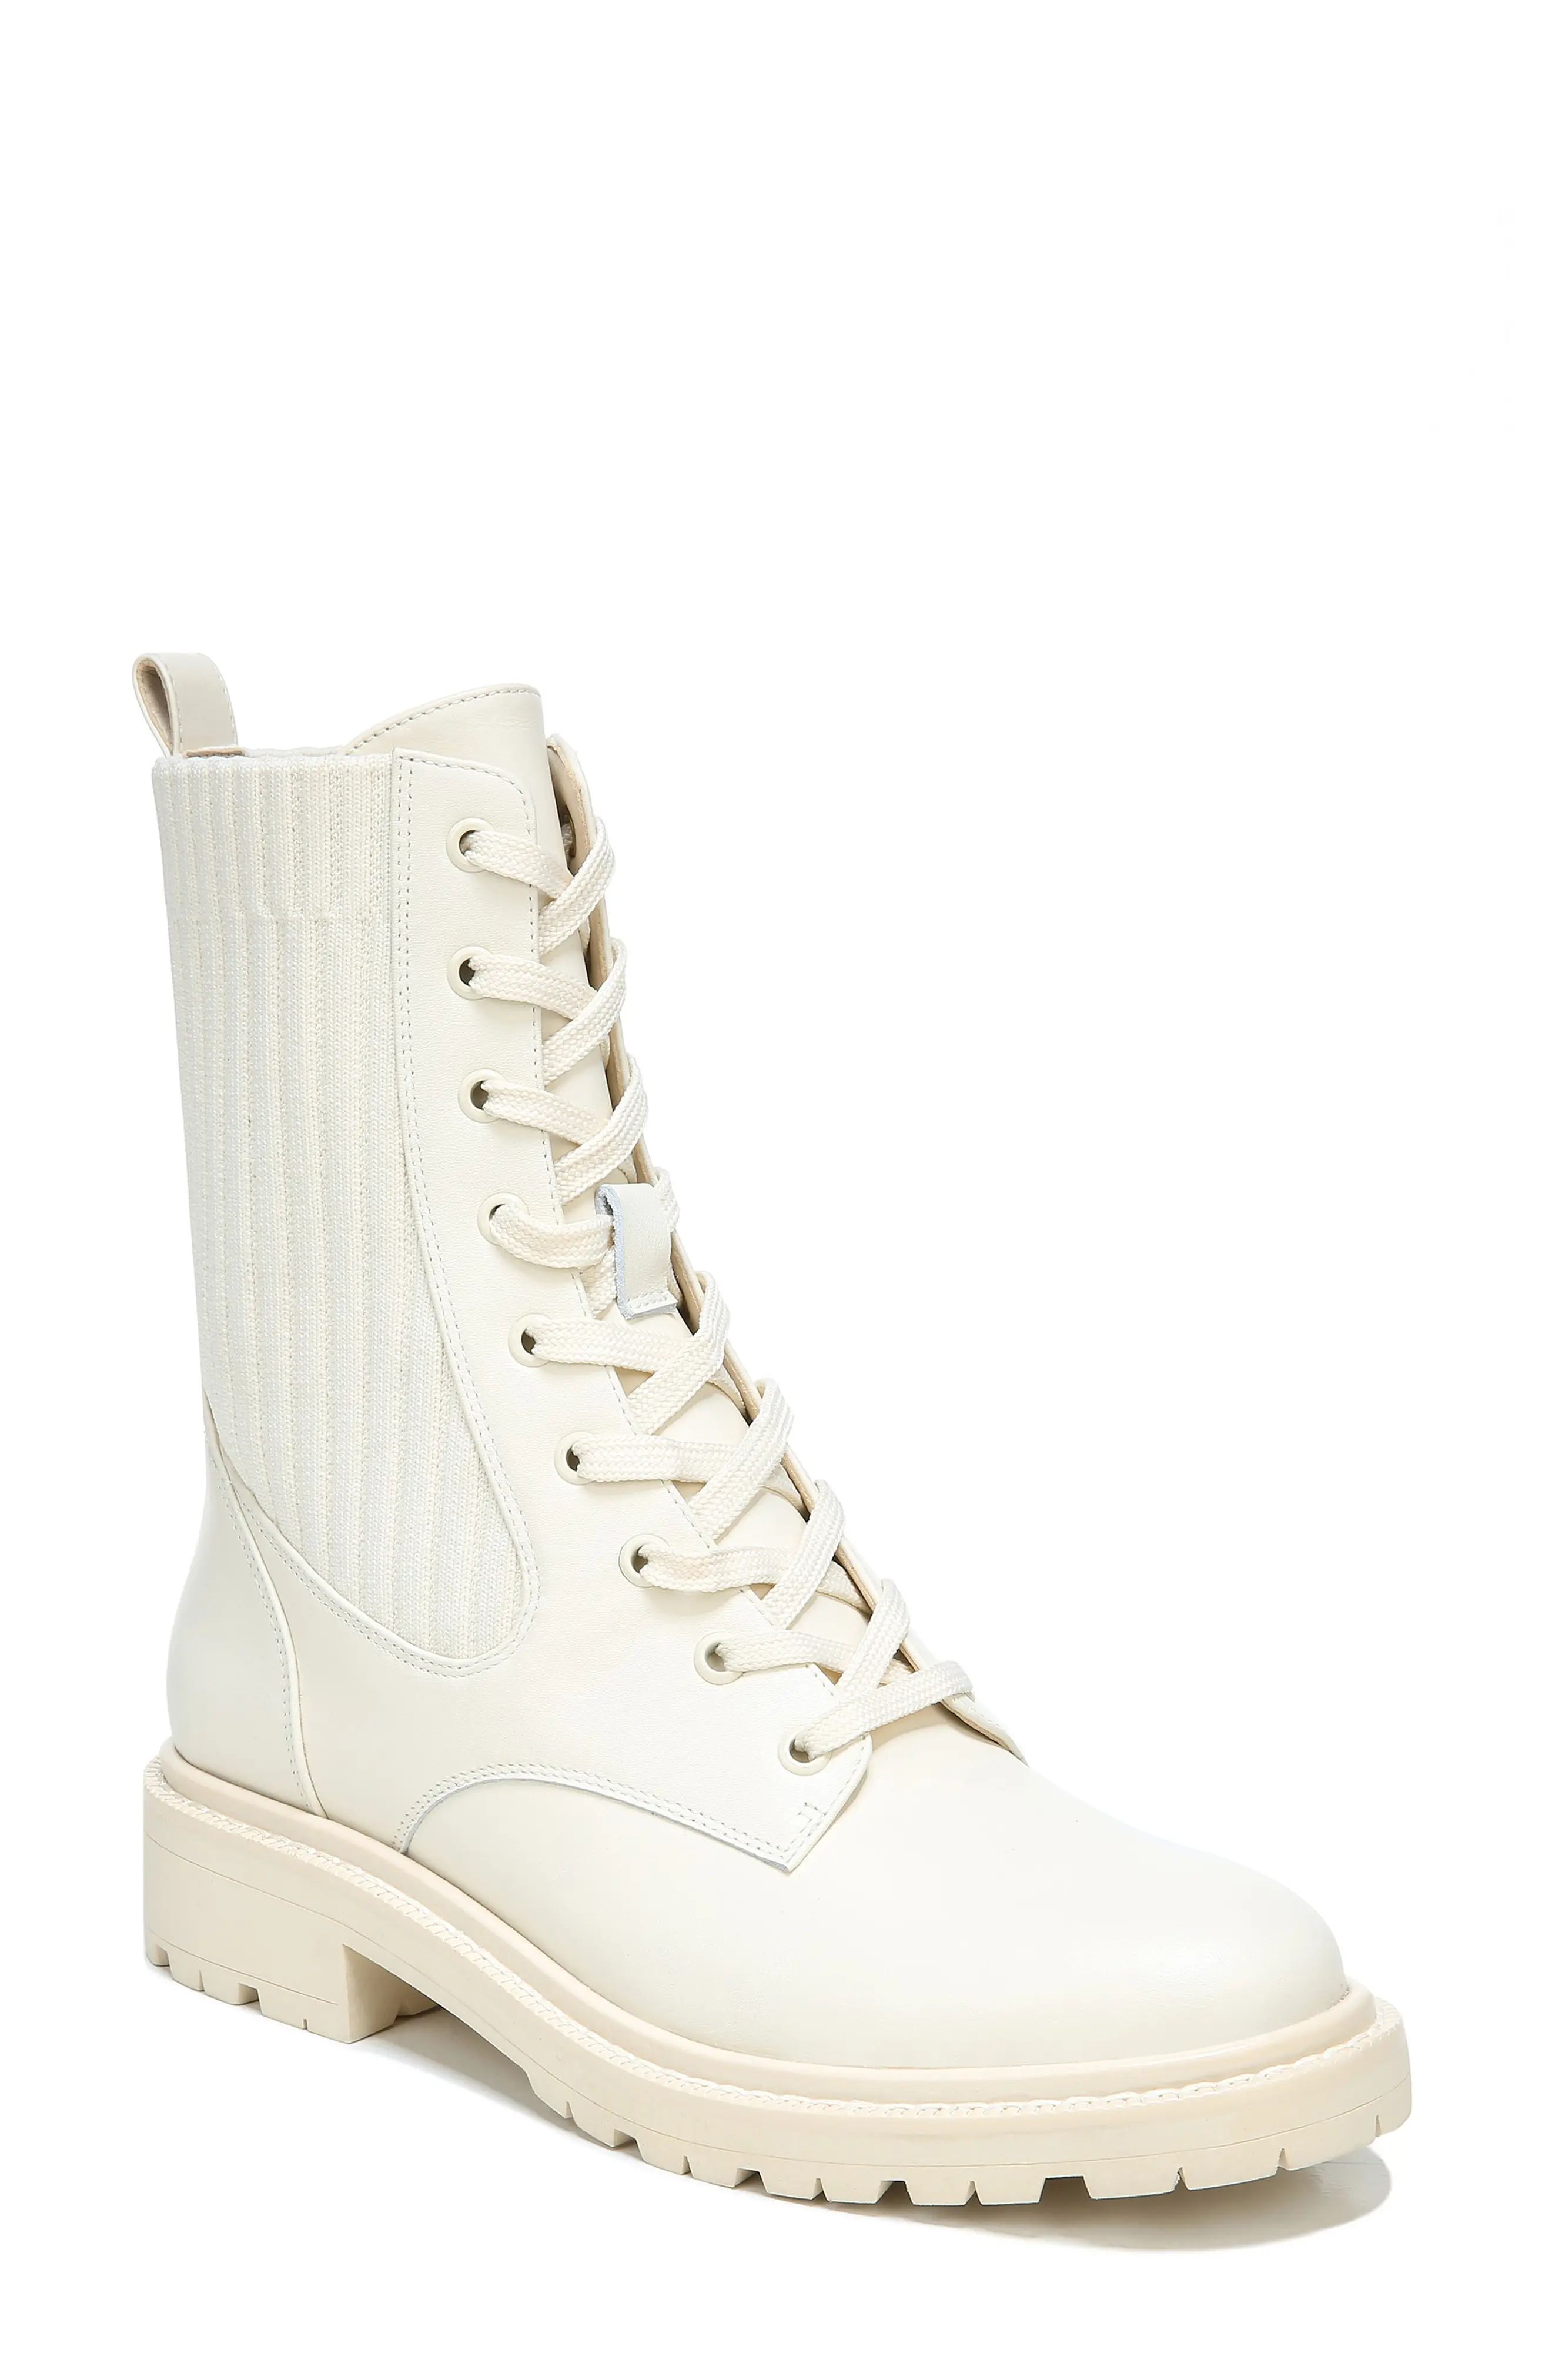 Sam Edelman Lydell Mixed Media Combat Boot, Size 6.5 in Ivory at Nordstrom | Nordstrom